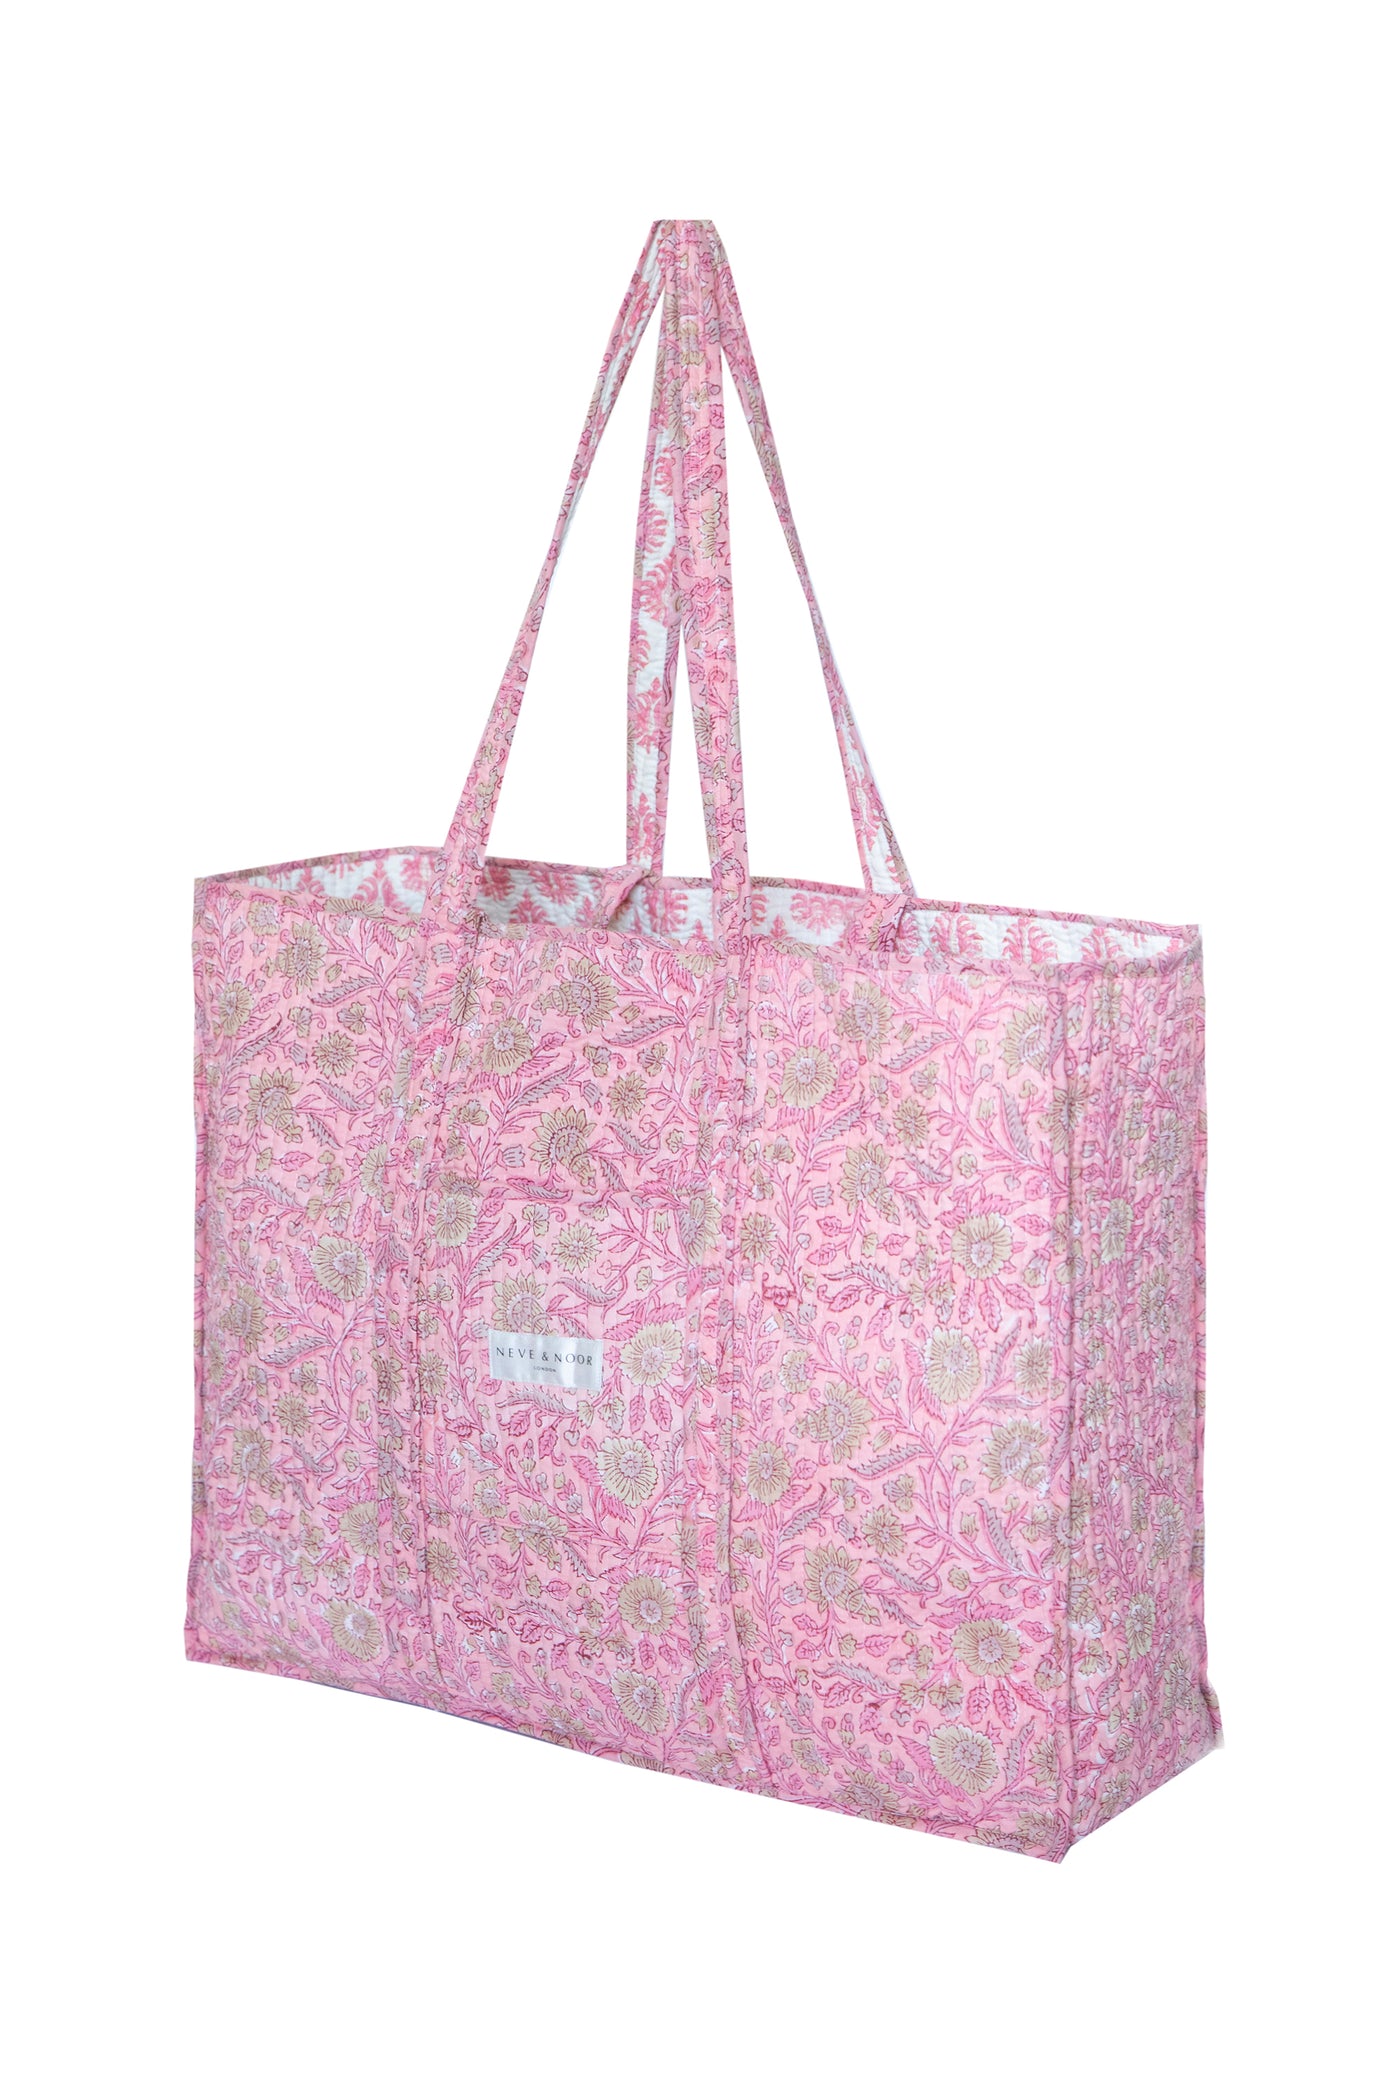 Blush Floral Tote Carry Bag